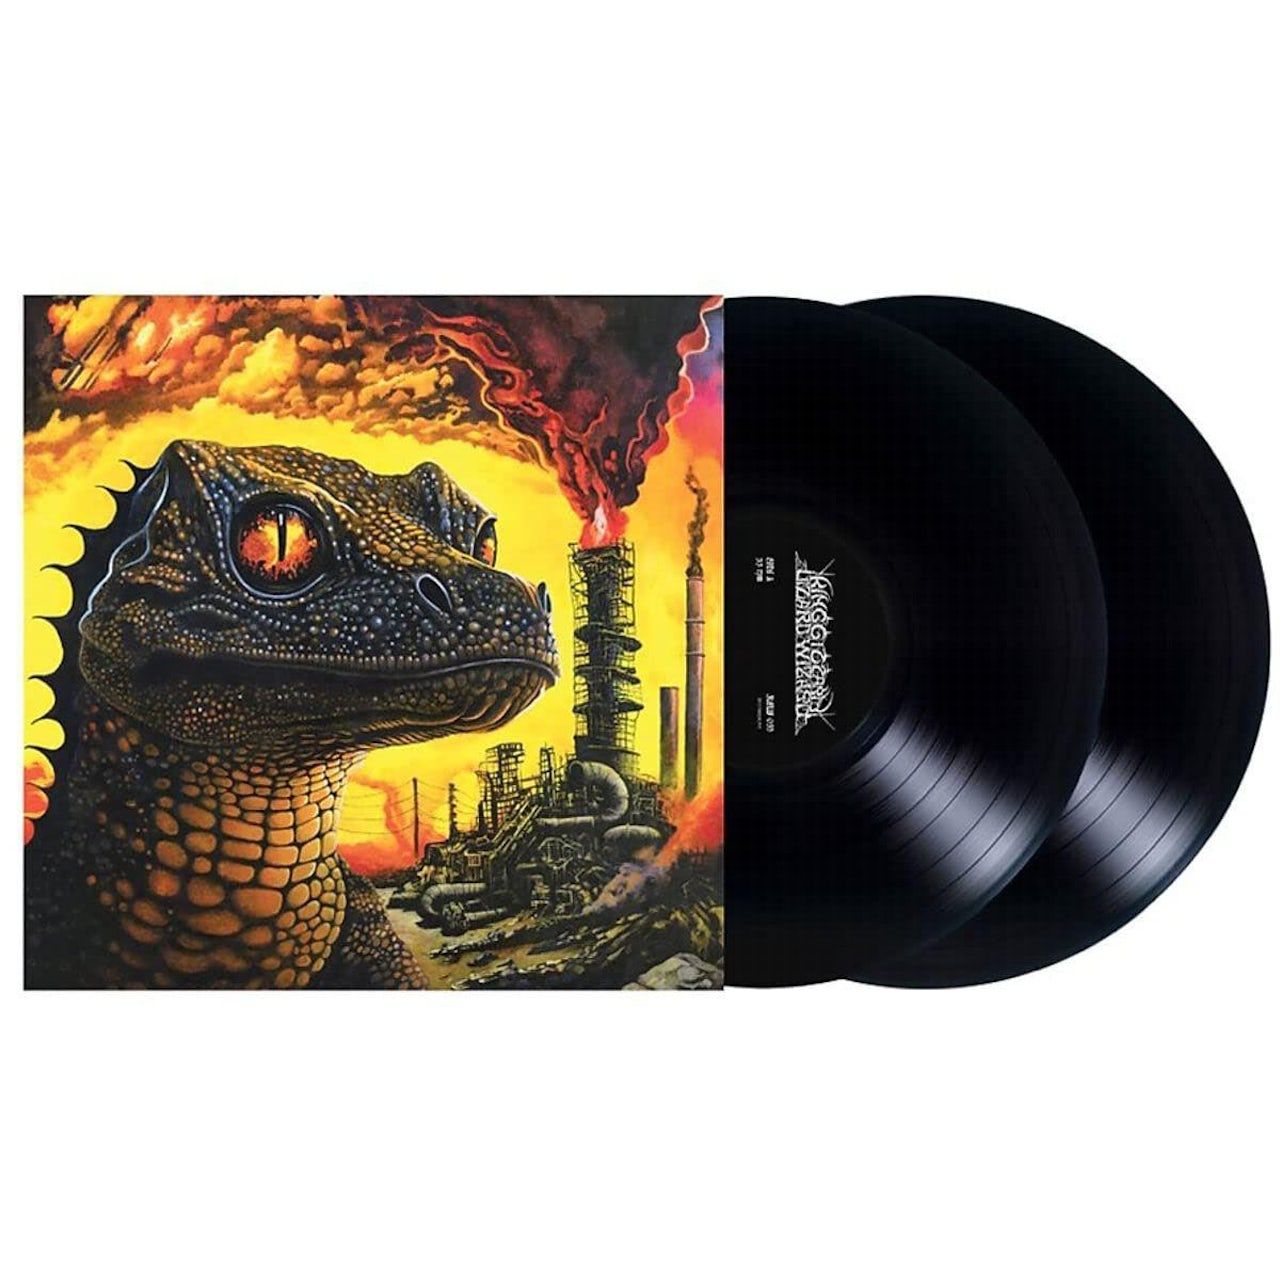 0842812189524, Виниловая пластинка King Gizzard & The Lizard Wizard, Petrodragonic Apocalypse; Or, Dawn Of Eternal Night: An Annihilation Of Planet Earth And The Beginning Of Merciless Damnation (coloured) 0842812155918 виниловая пластинка king gizzard